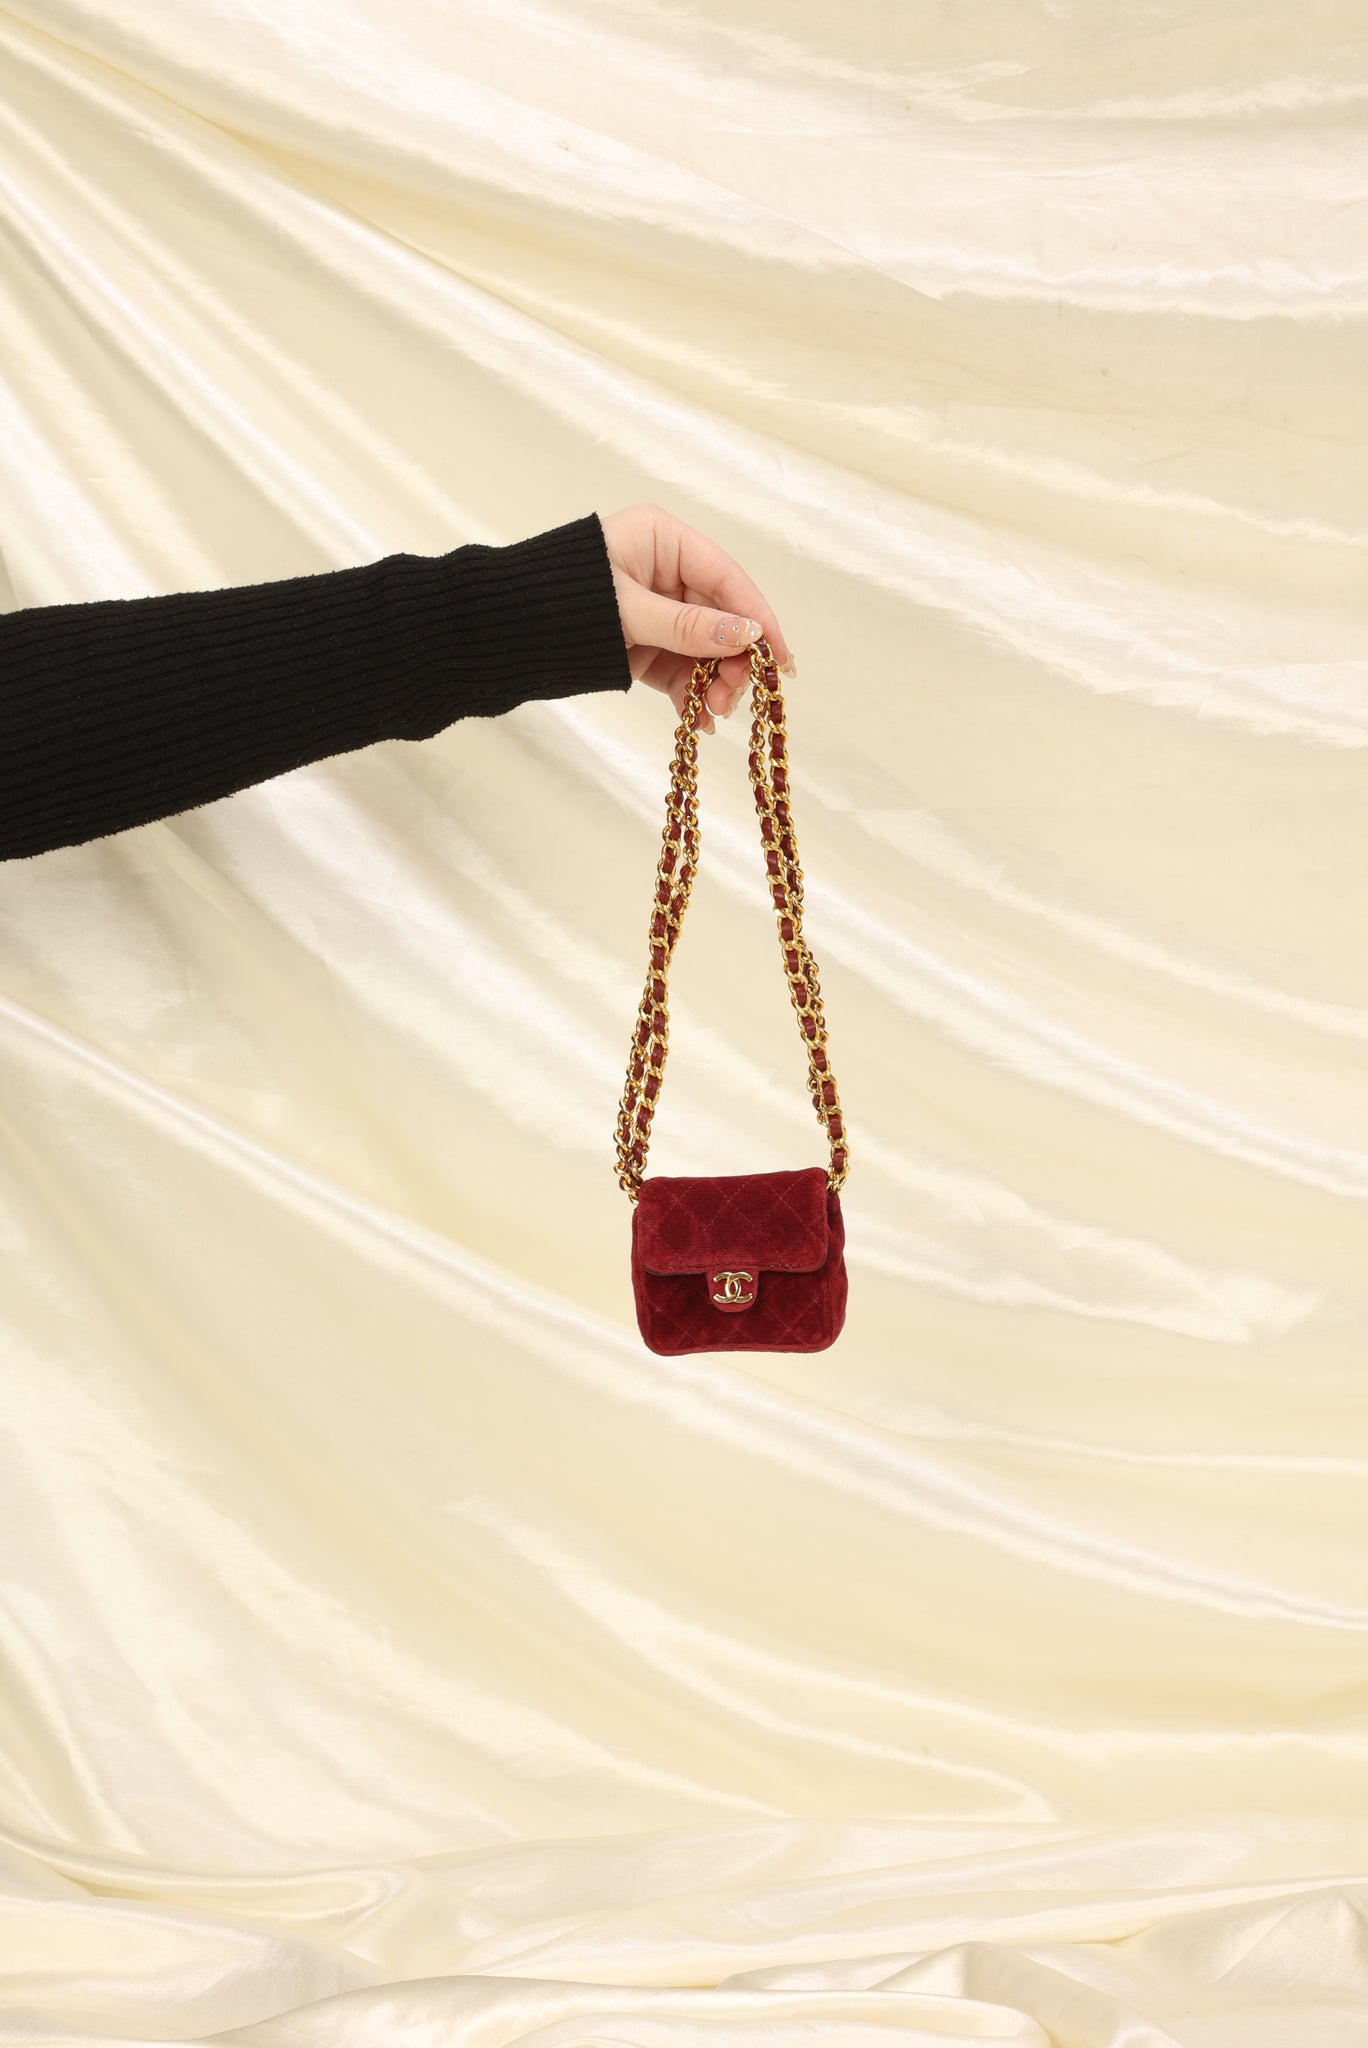 Snag the Latest CHANEL Velvet Exterior Mini Bags & Handbags for Women with  Fast and Free Shipping. Authenticity Guaranteed on Designer Handbags $500+  at .